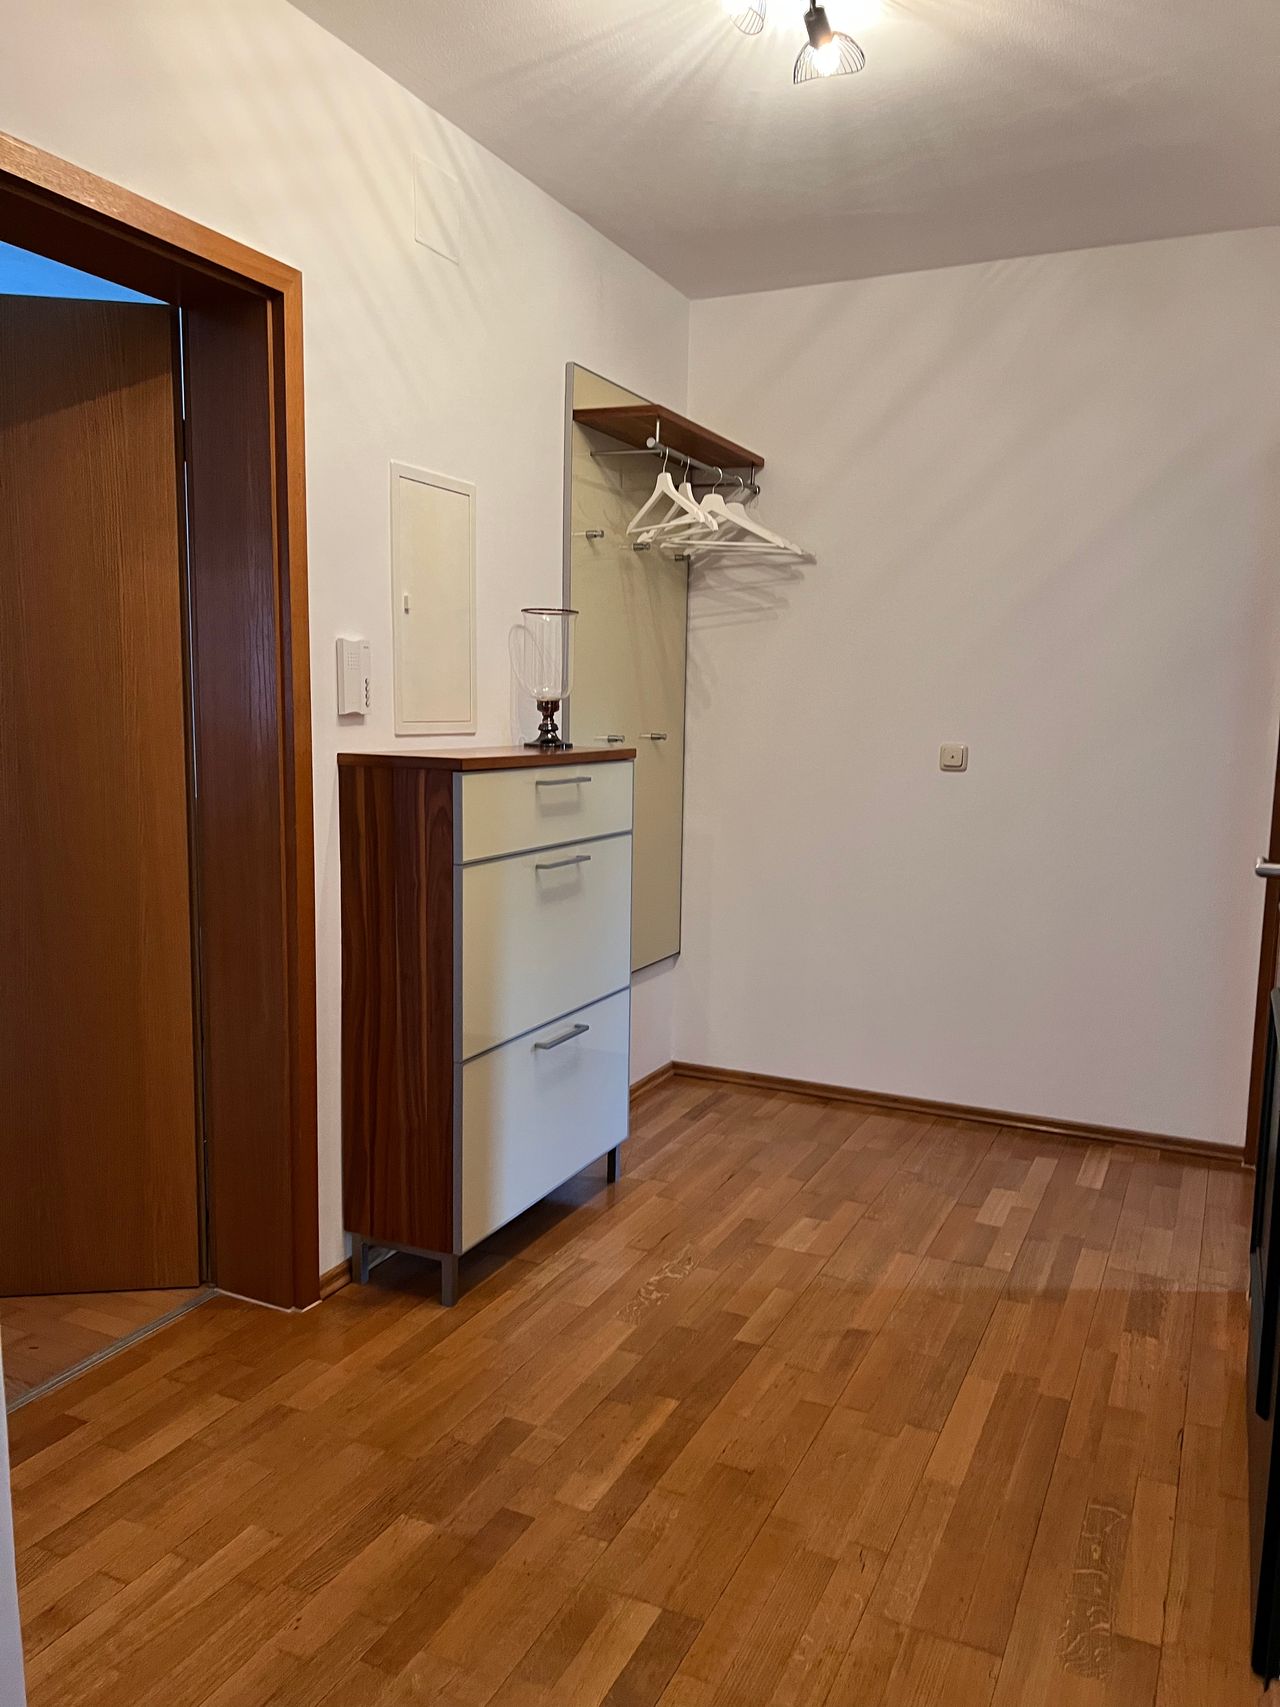 Furnished four rooms ground floor apartment with own garden directly at the Engl. garden and small river - with whirlpool and fireplace